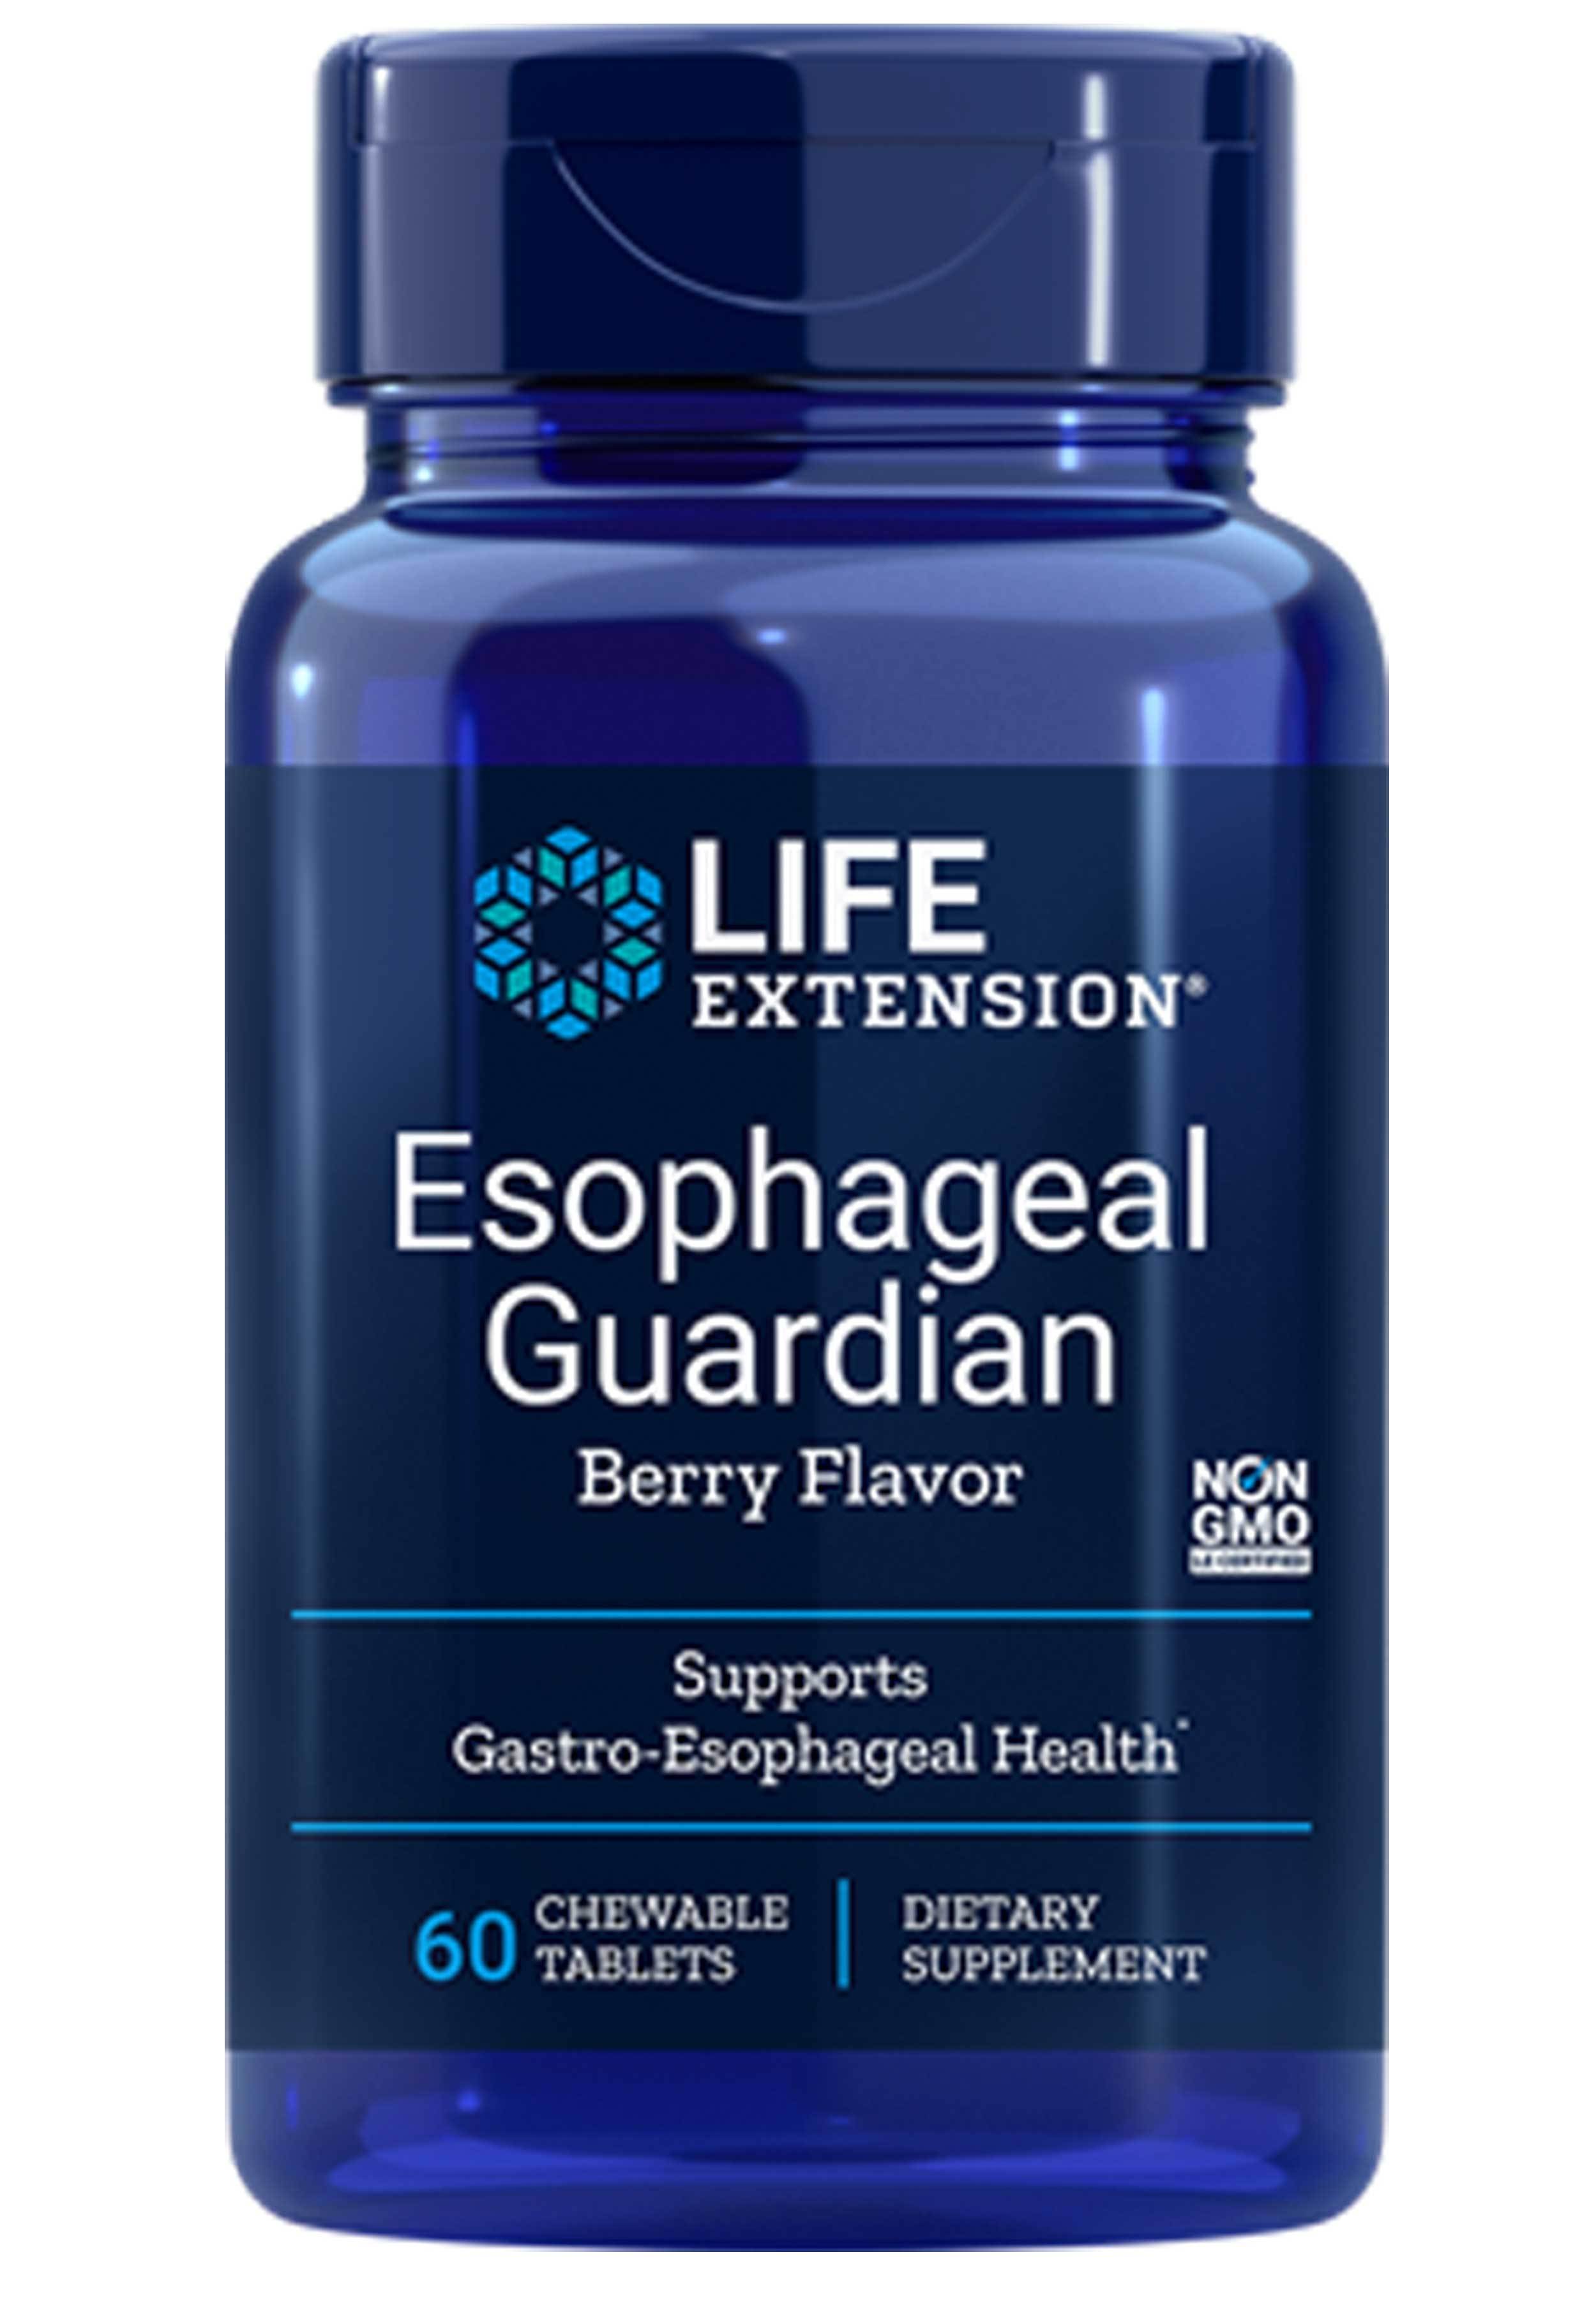 Life Extension Esophageal Guardian